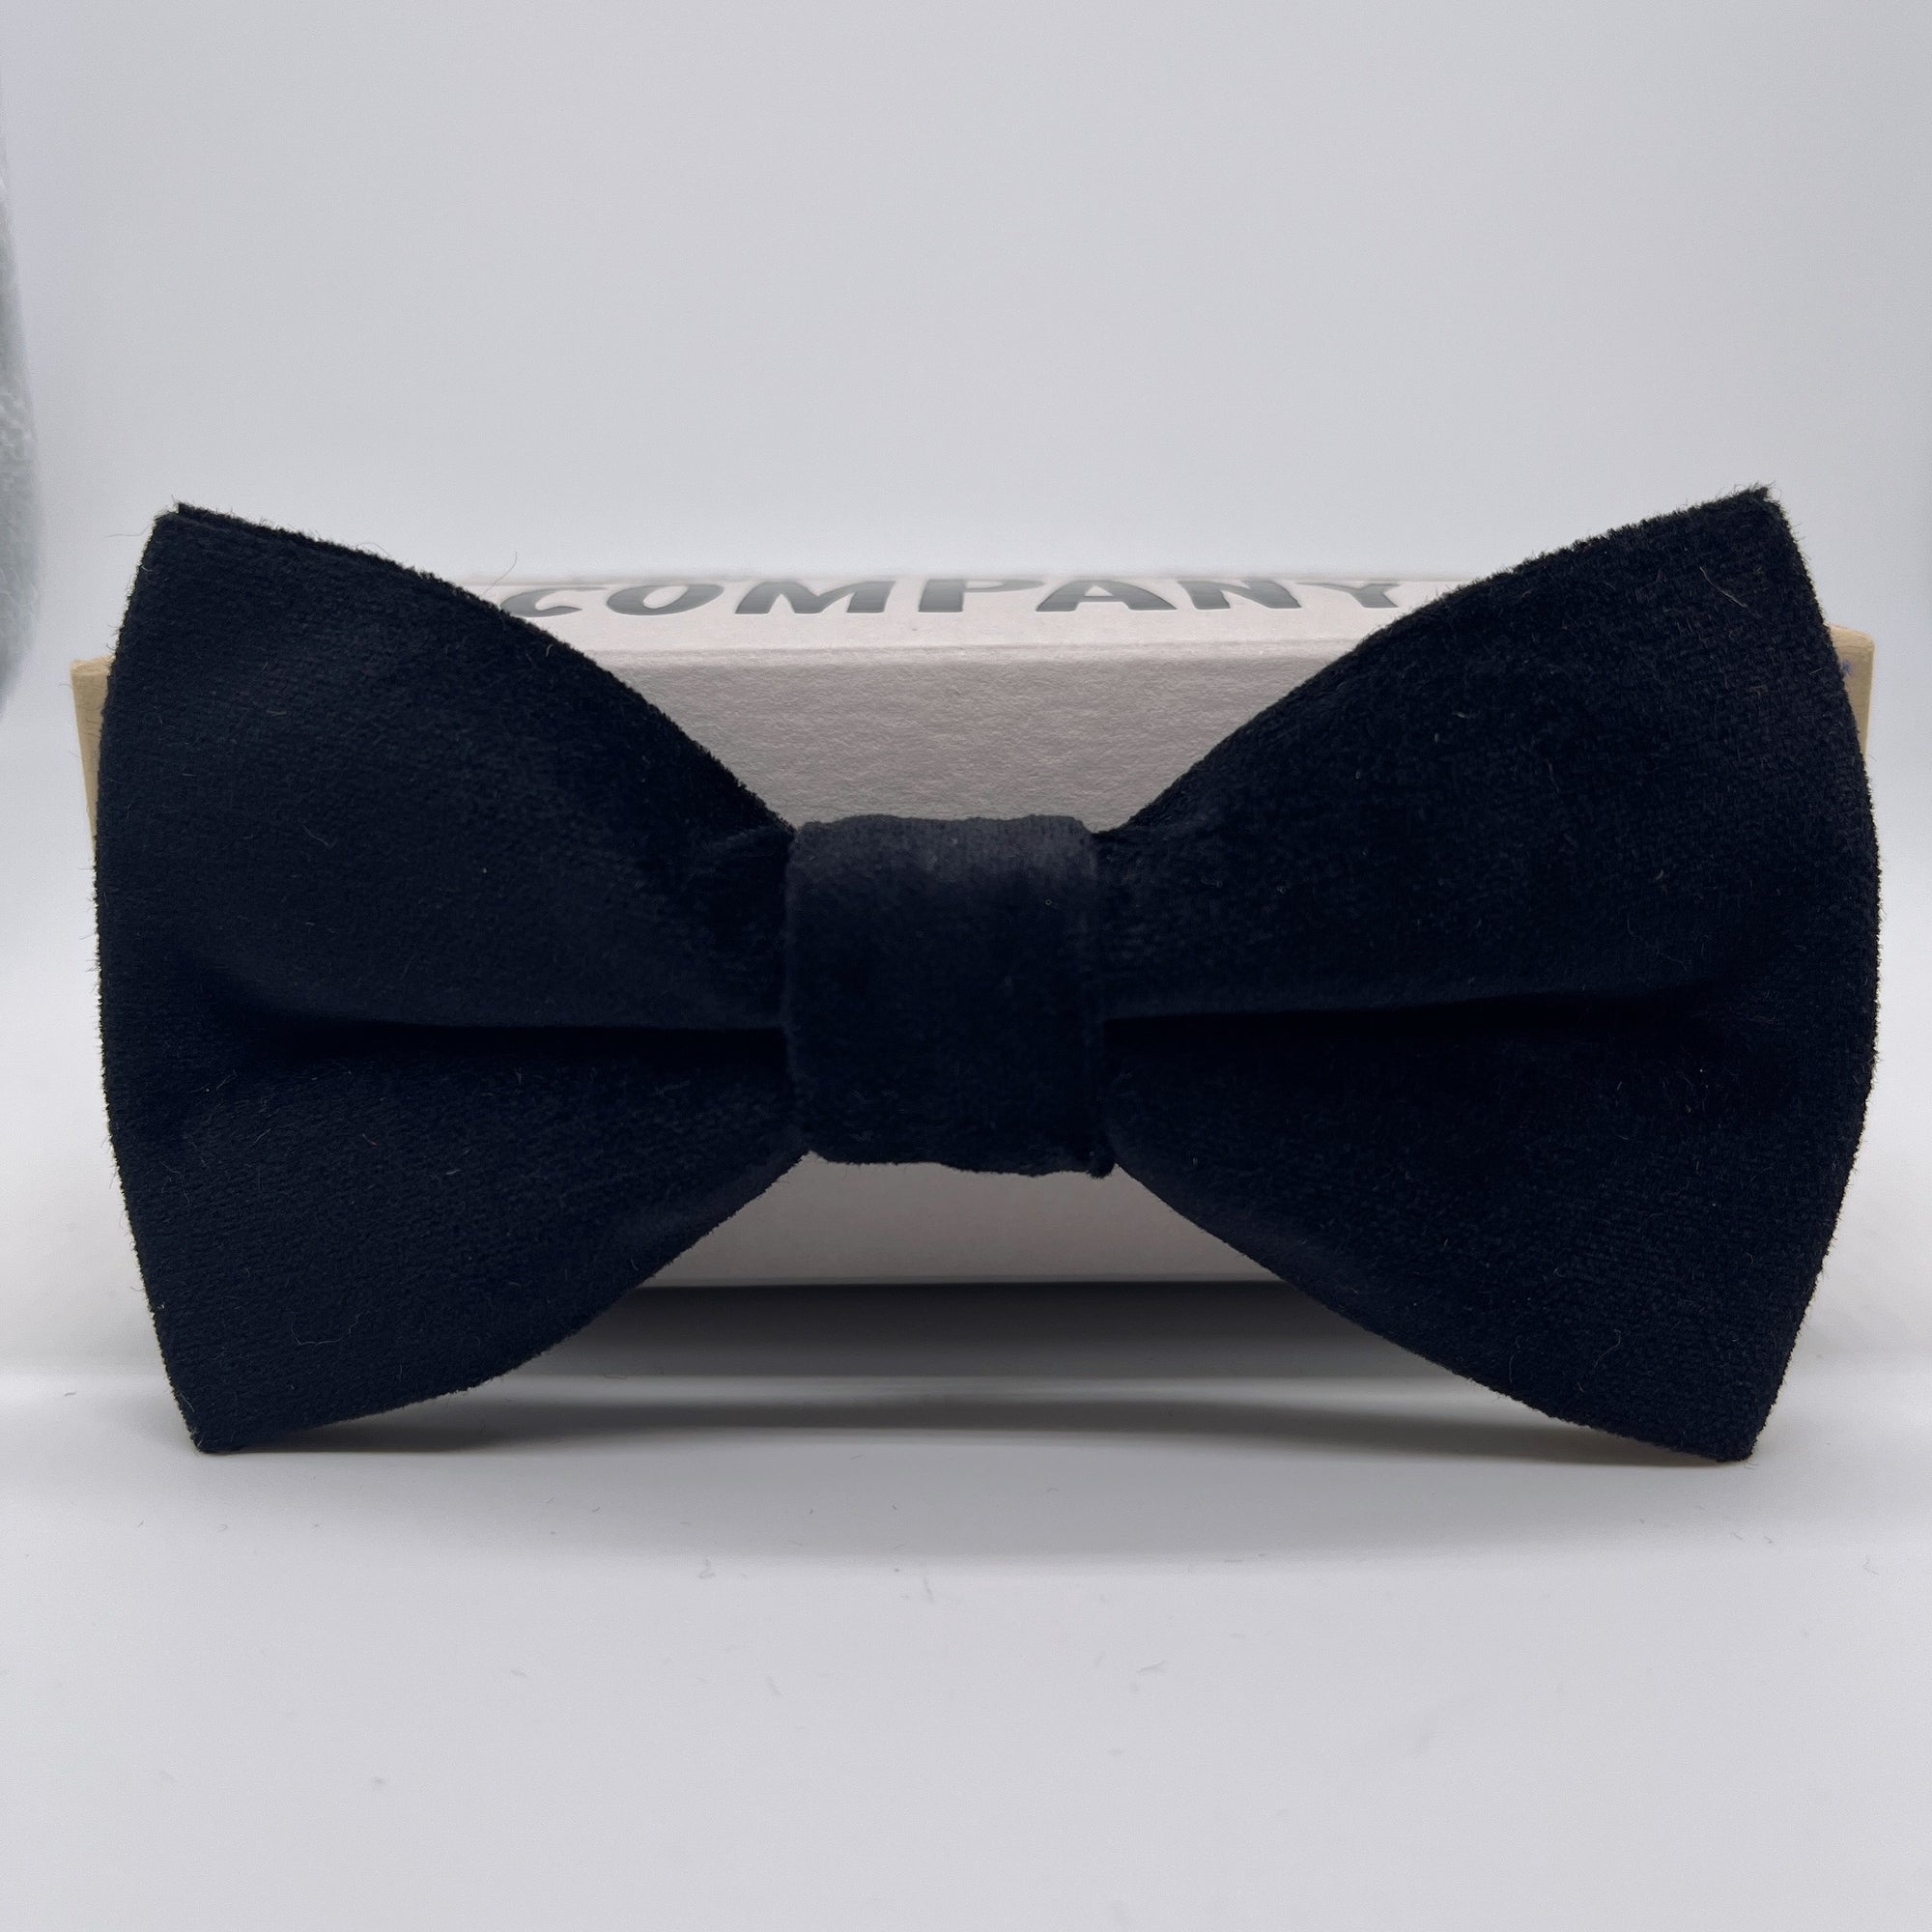 Velvet Bow Tie in Black by the Belfast Bow Company